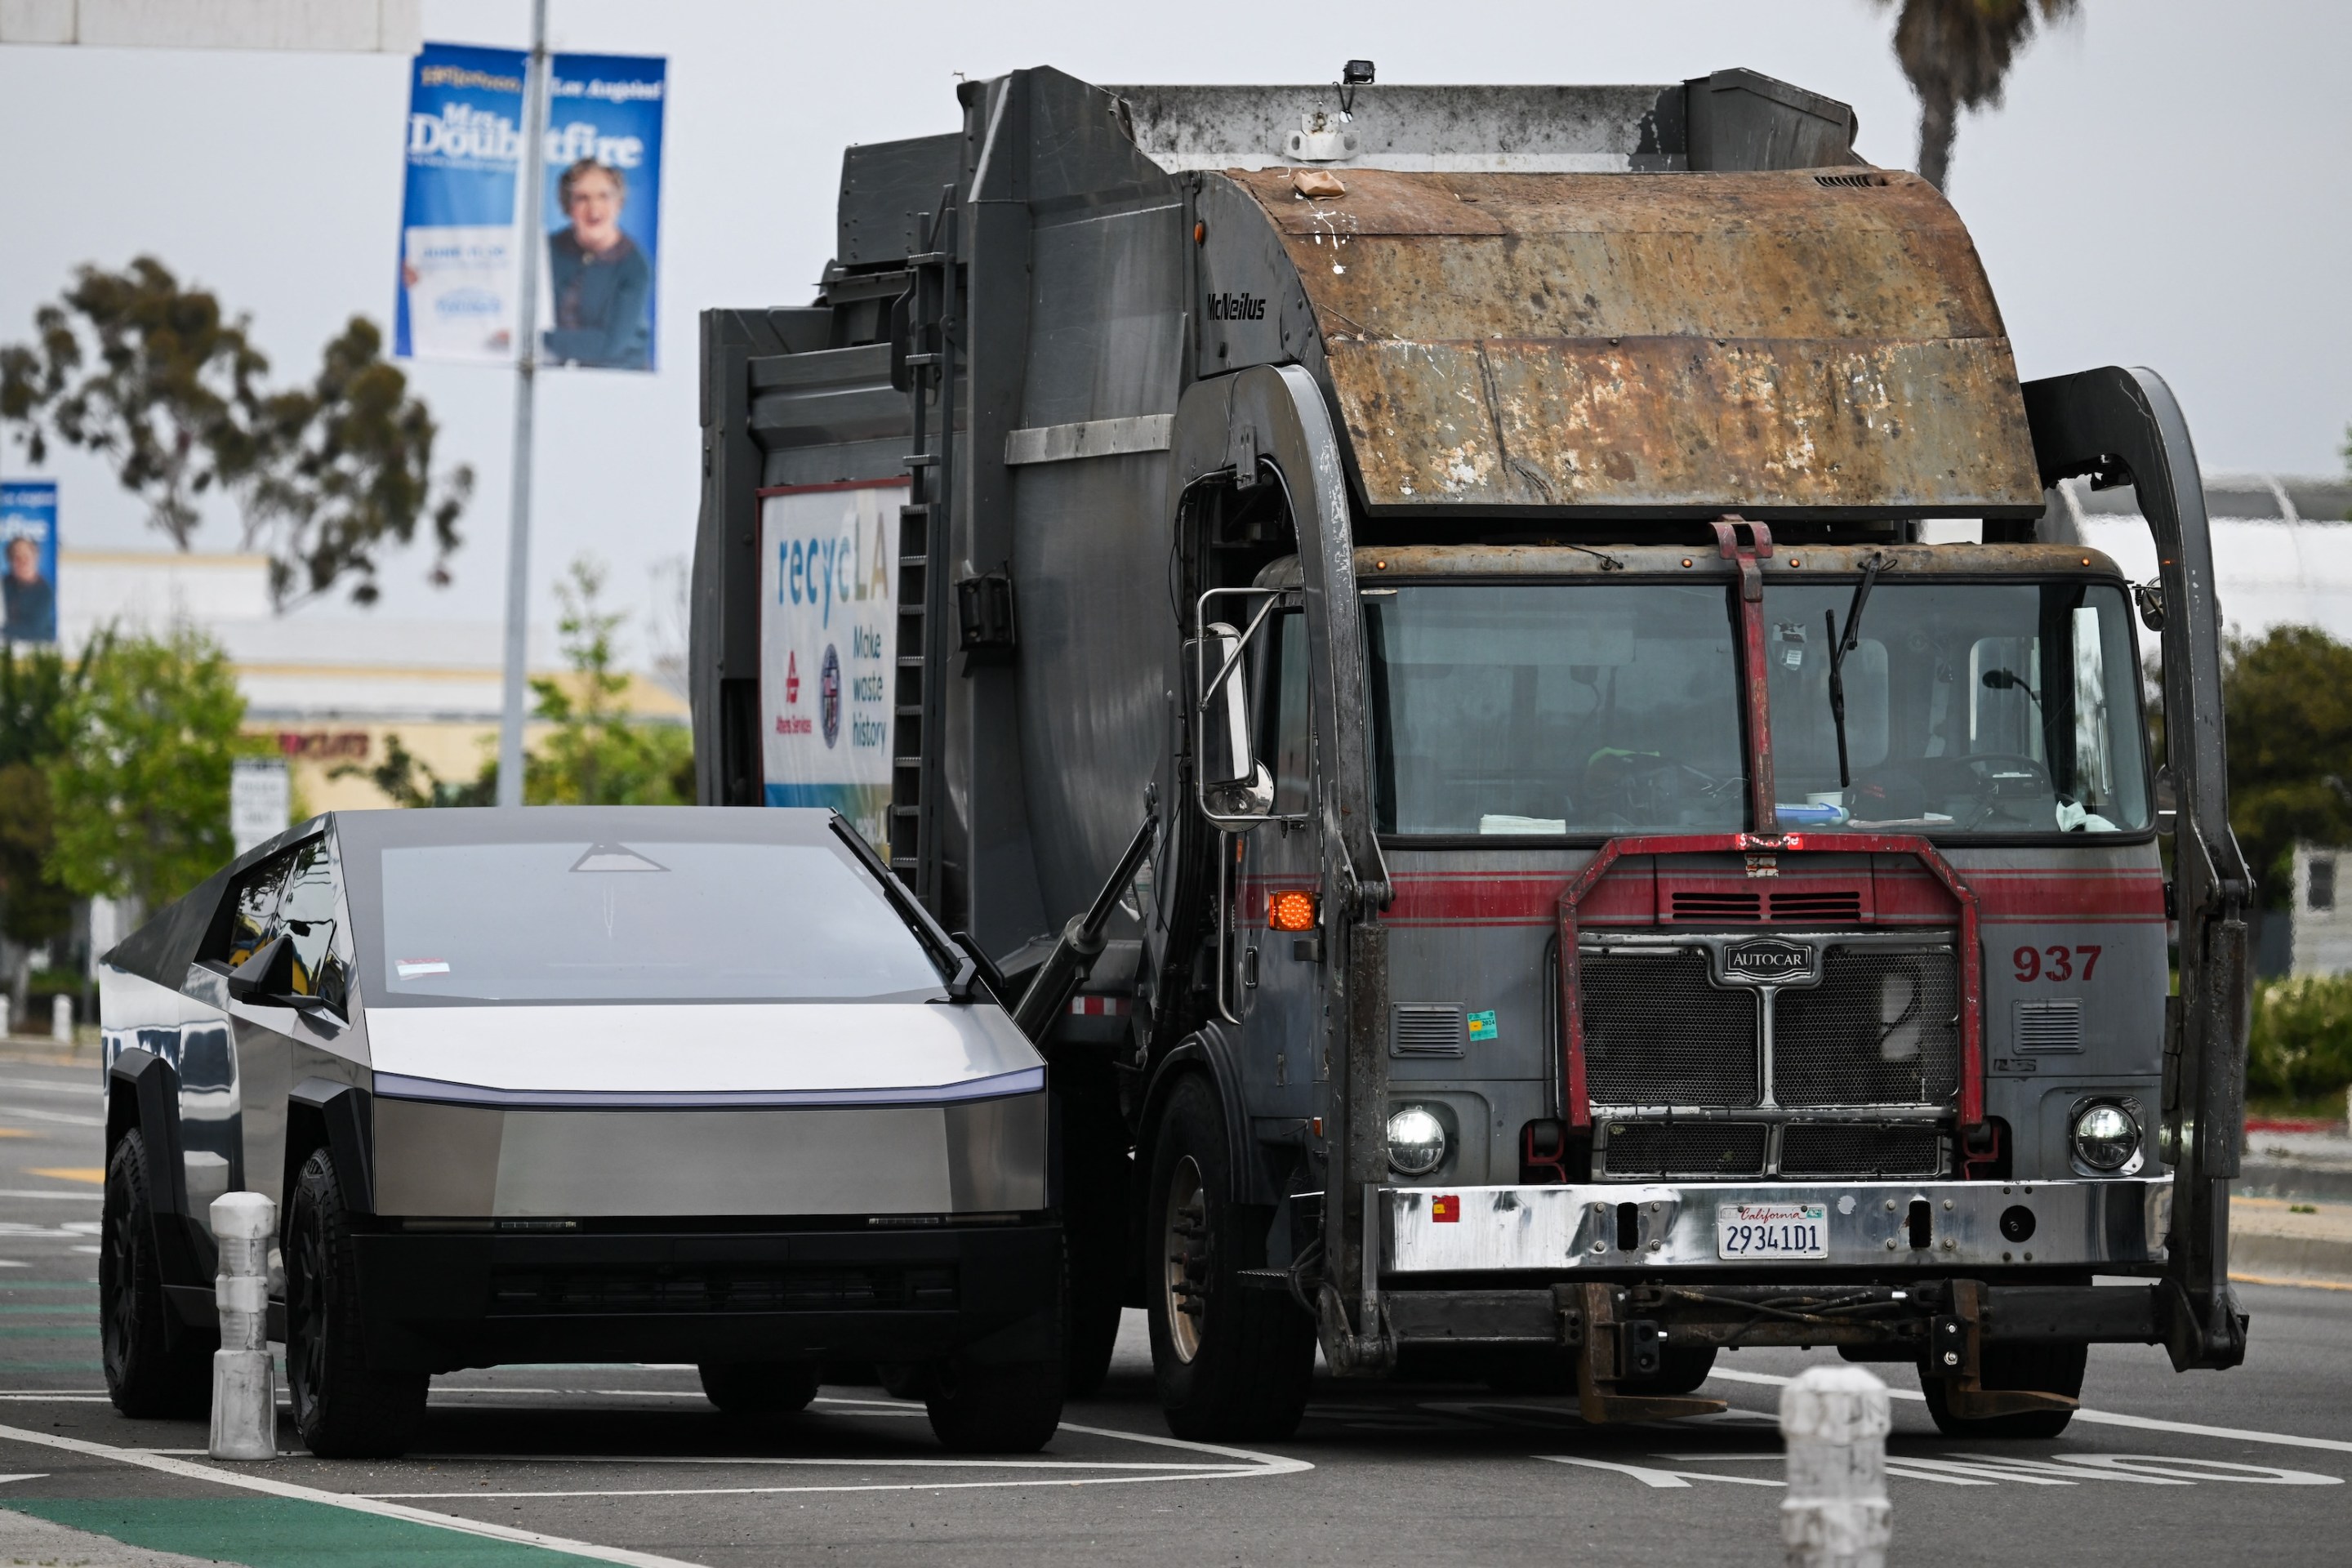 A Tesla Cybertruck electric vehicle sits parked next to a garbage truck in Los Angeles.